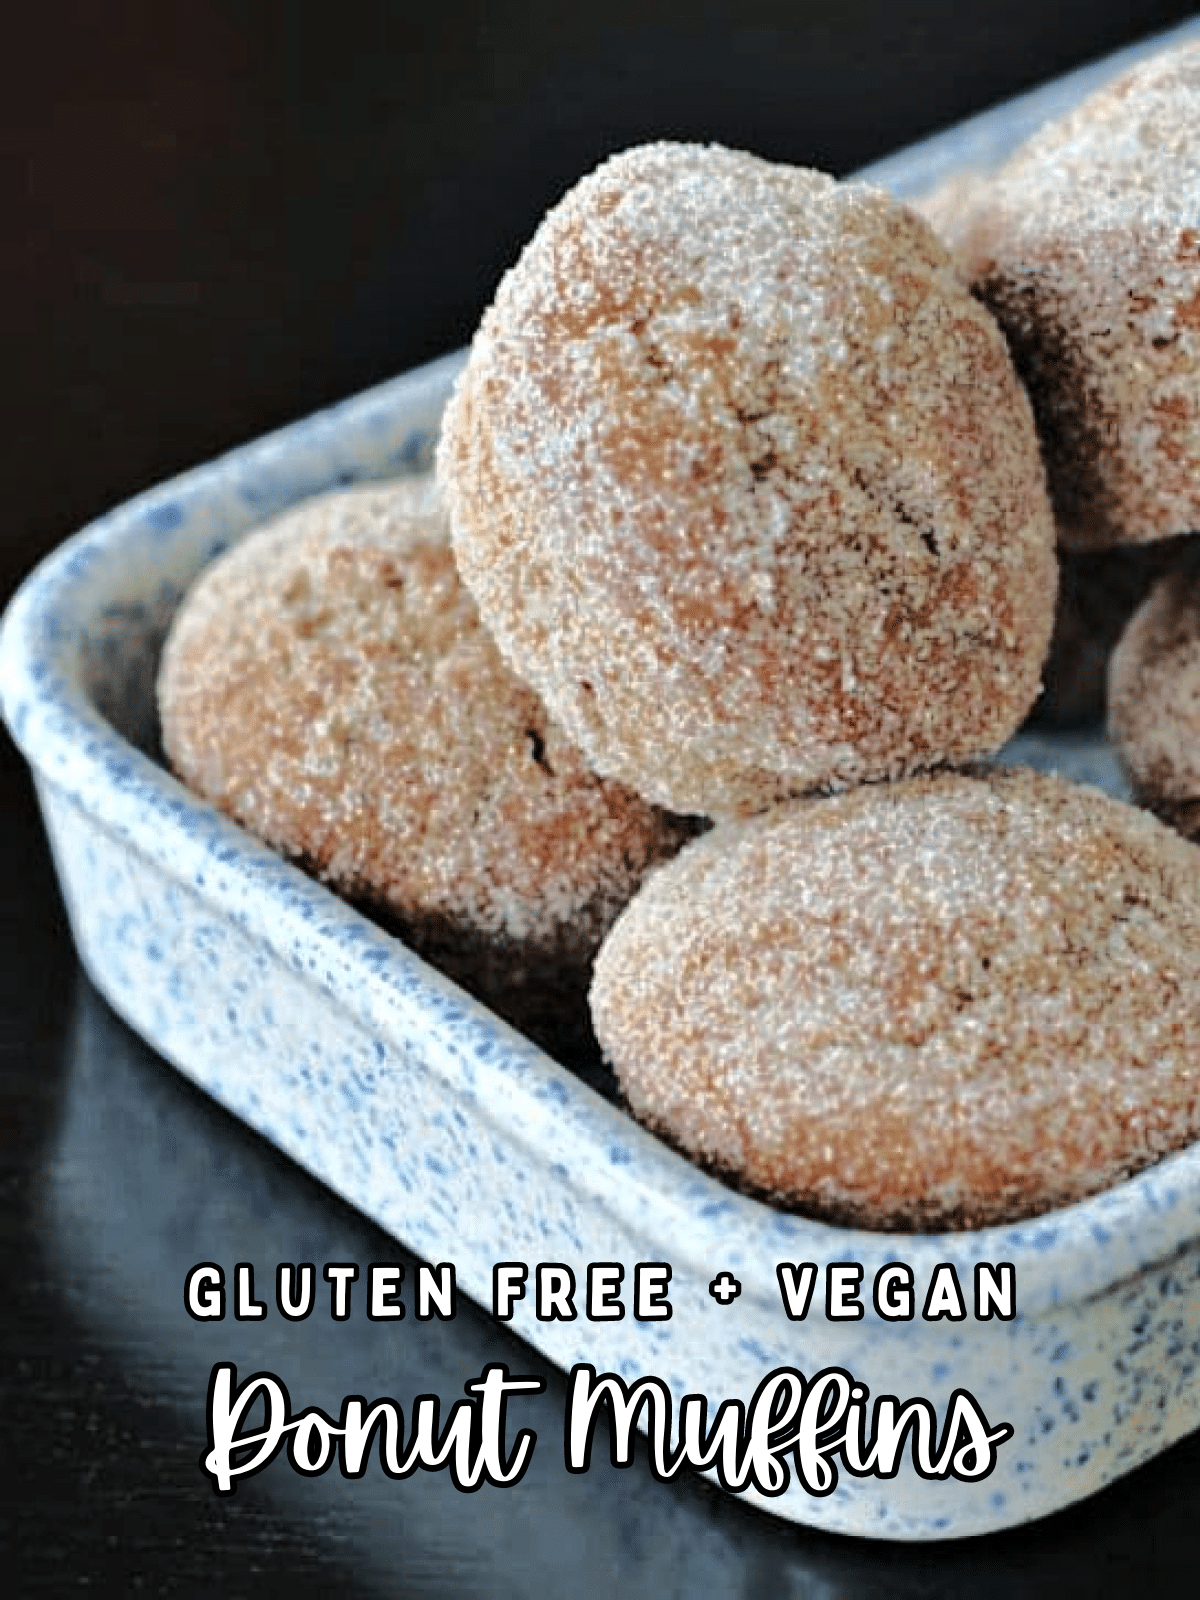 Sugar coated "donut muffins" in a shallow walled dish.